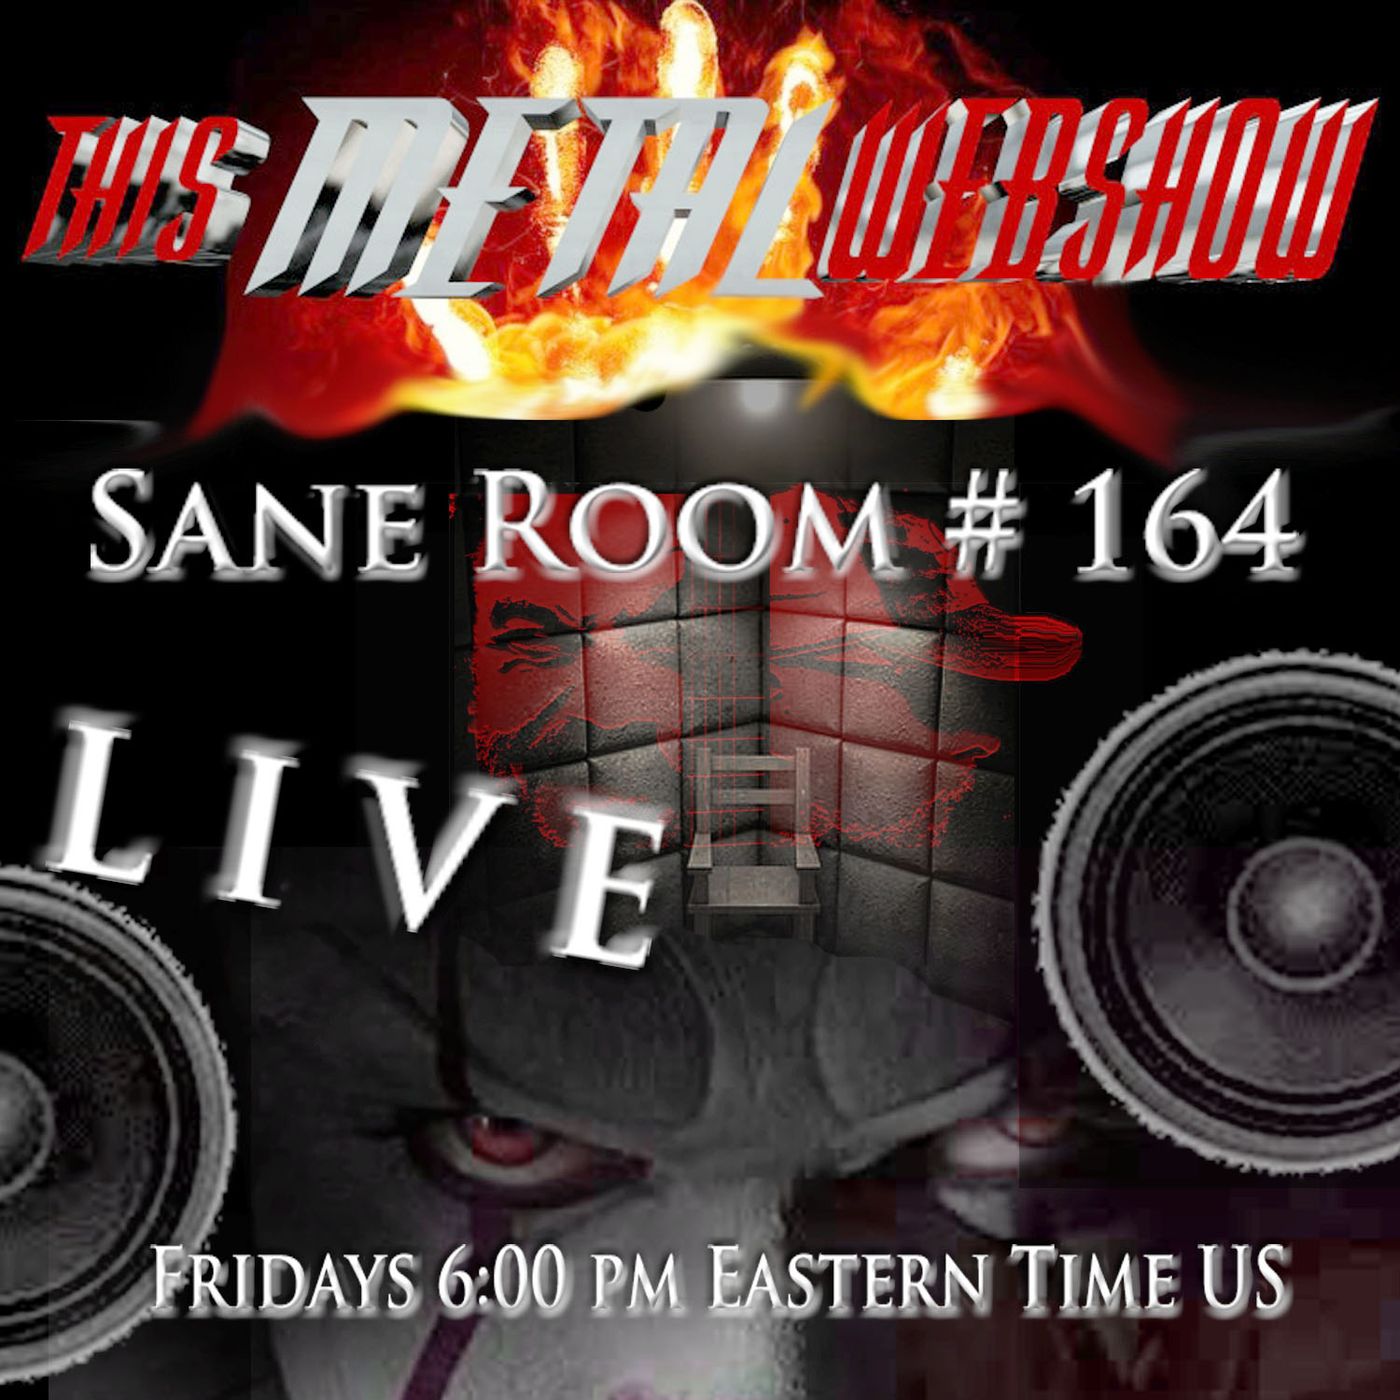 This Metal Webshow Sane Room # 164 LIVE